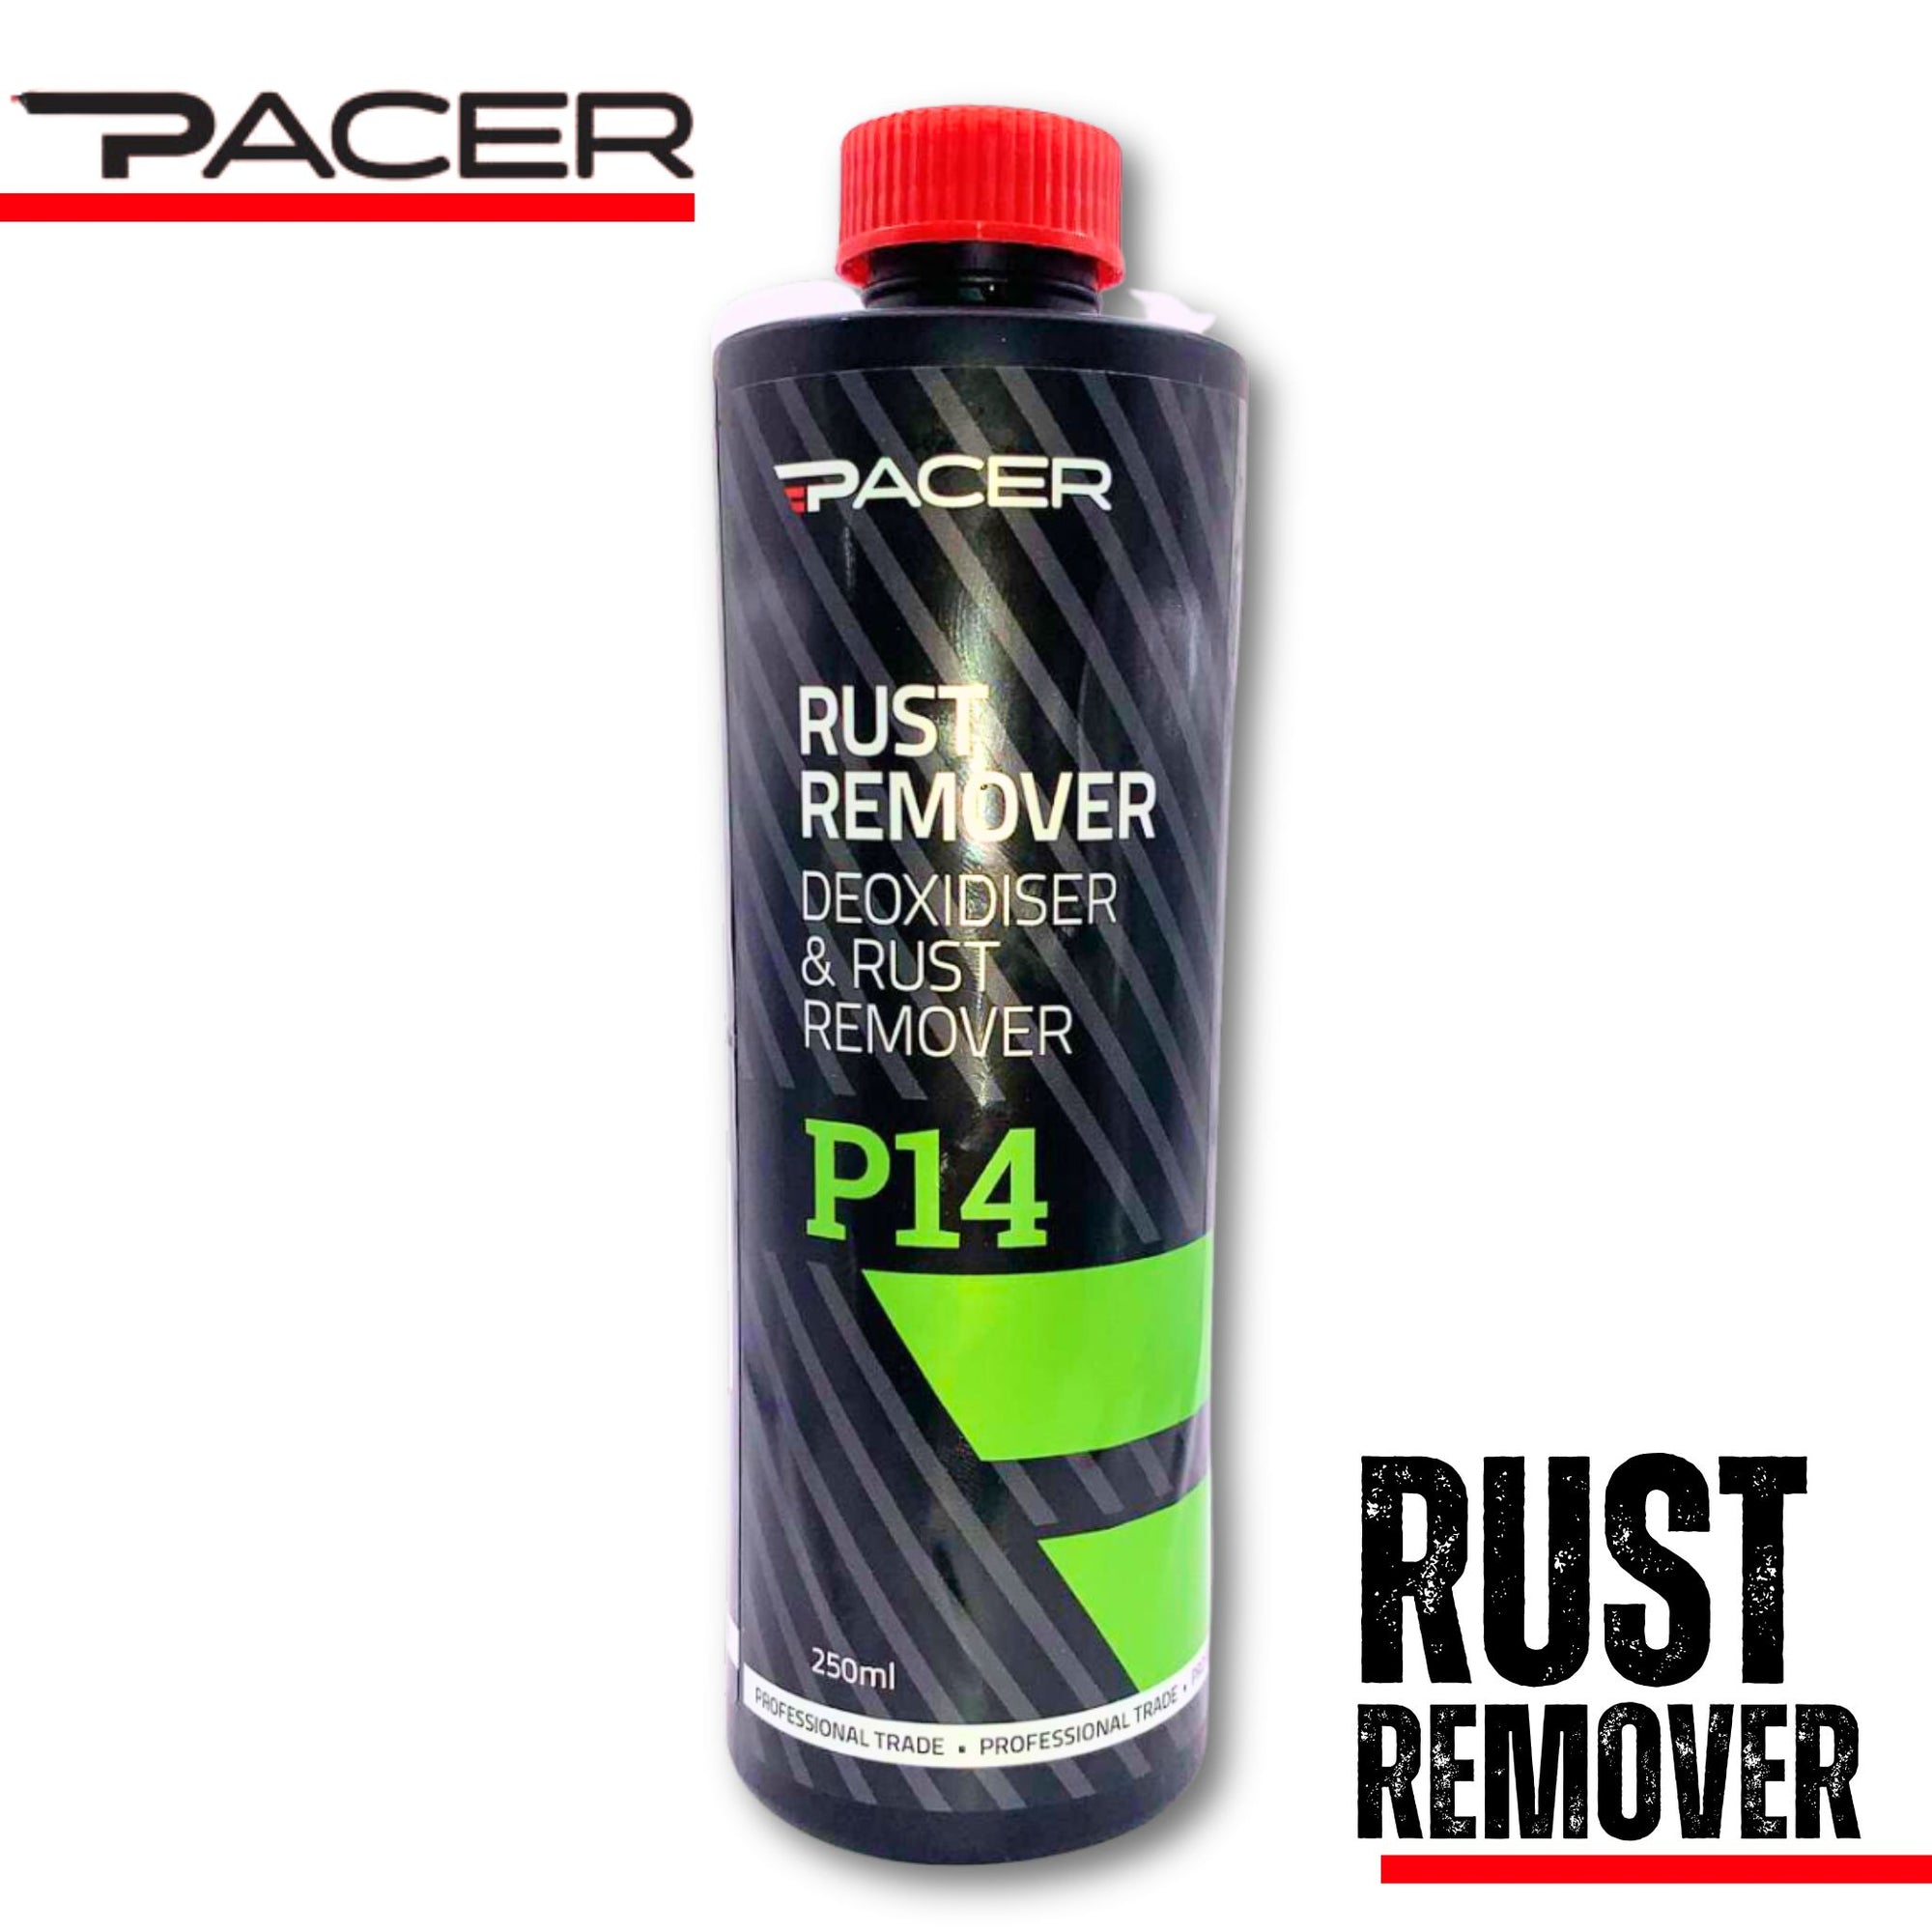 Pacer Pacer P14 Rust Remover 250ml RR250 - South East Clearance Centre